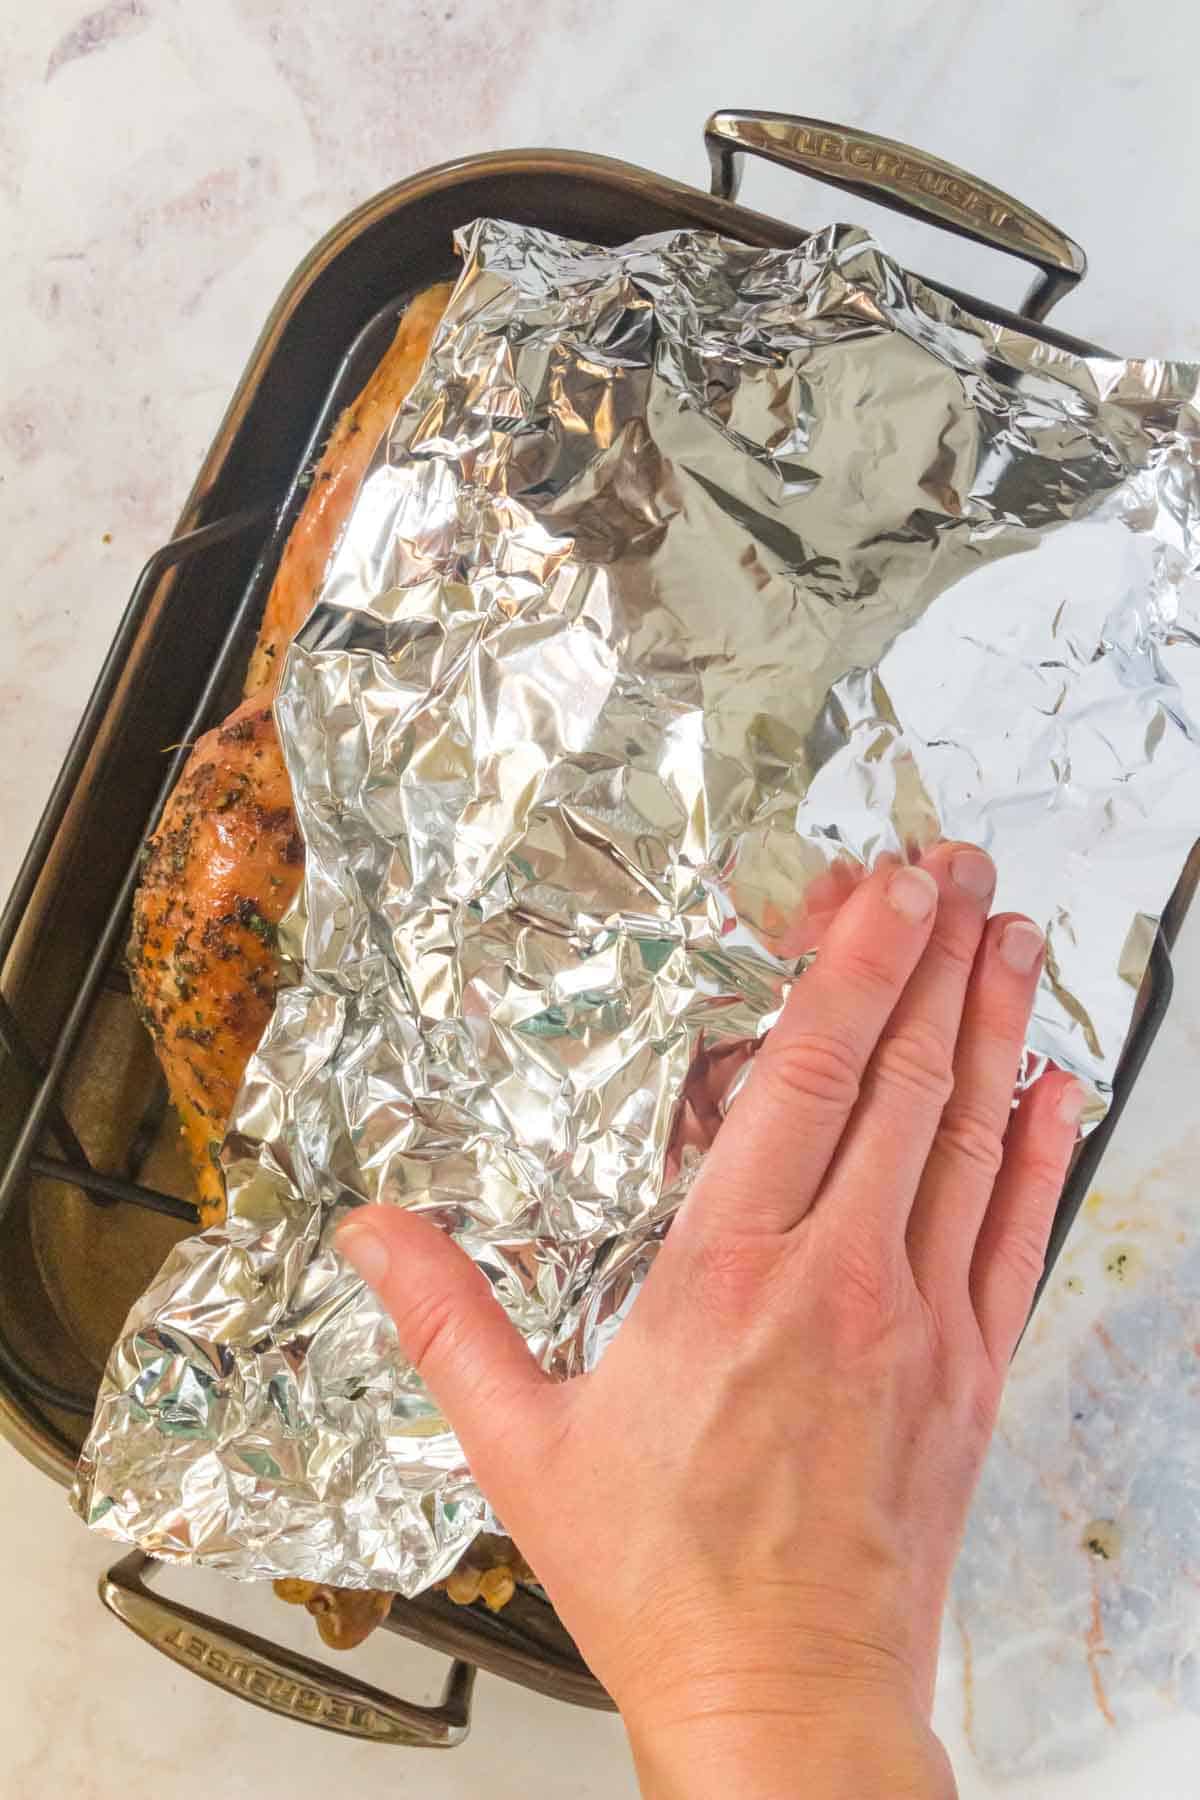 placing a sheet of aluminum foil over the partially roasted turkey